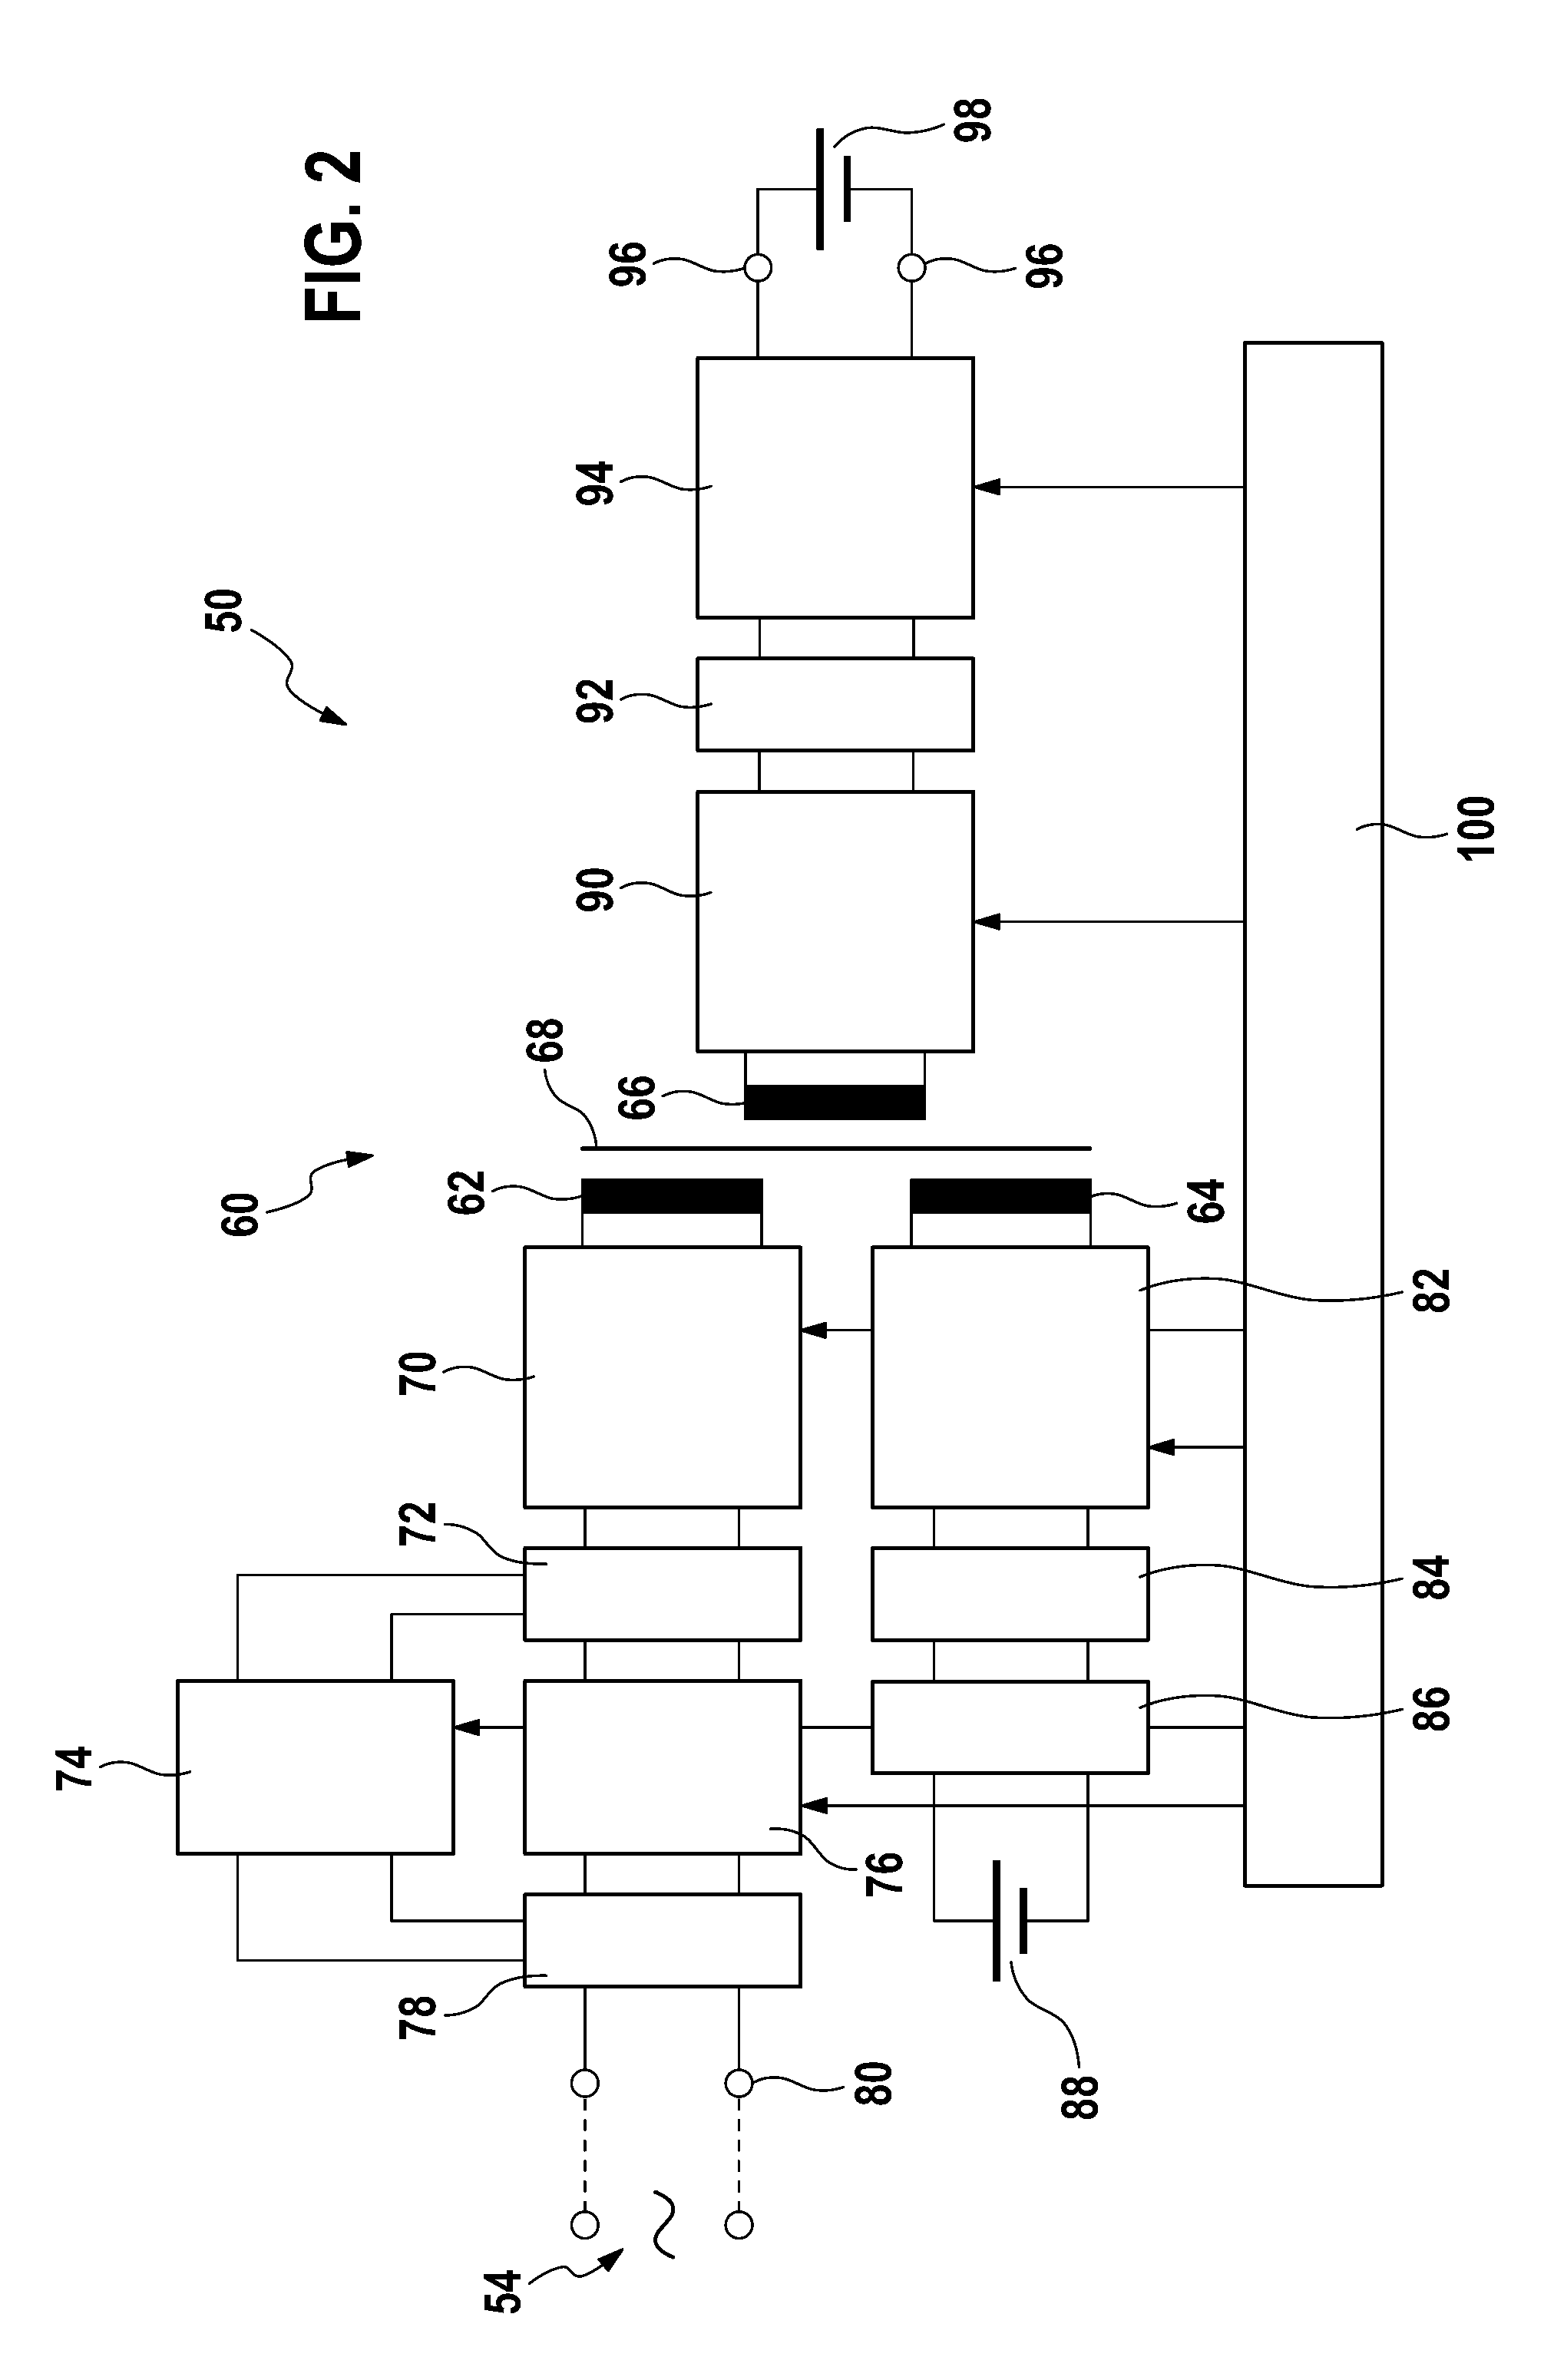 Converter circuit and method for transferring electrical energy